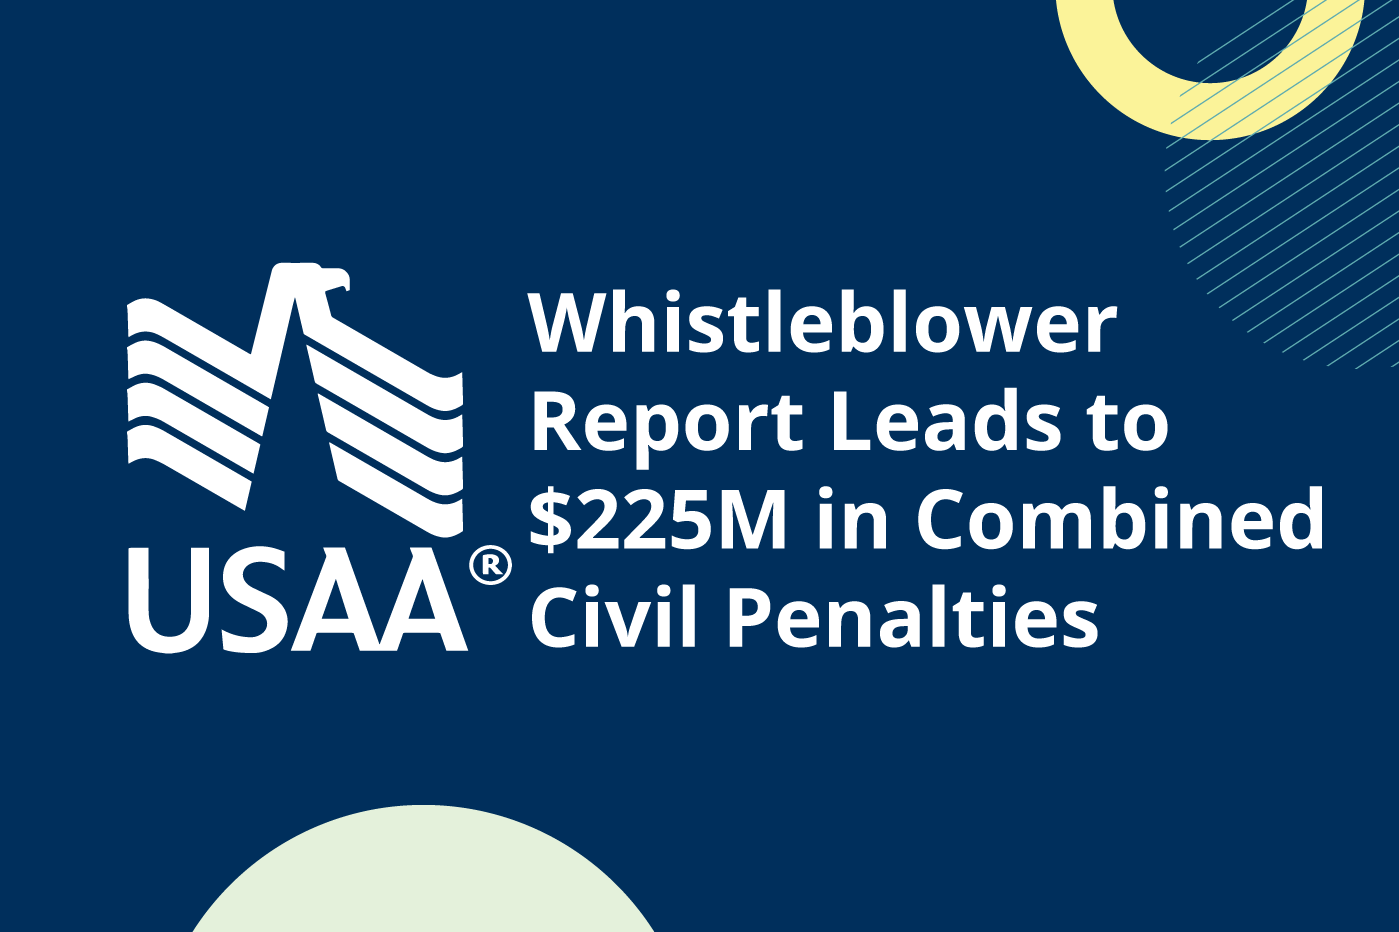 USAA Whistleblower Report Leads to $225M in Combined Civil Penalties